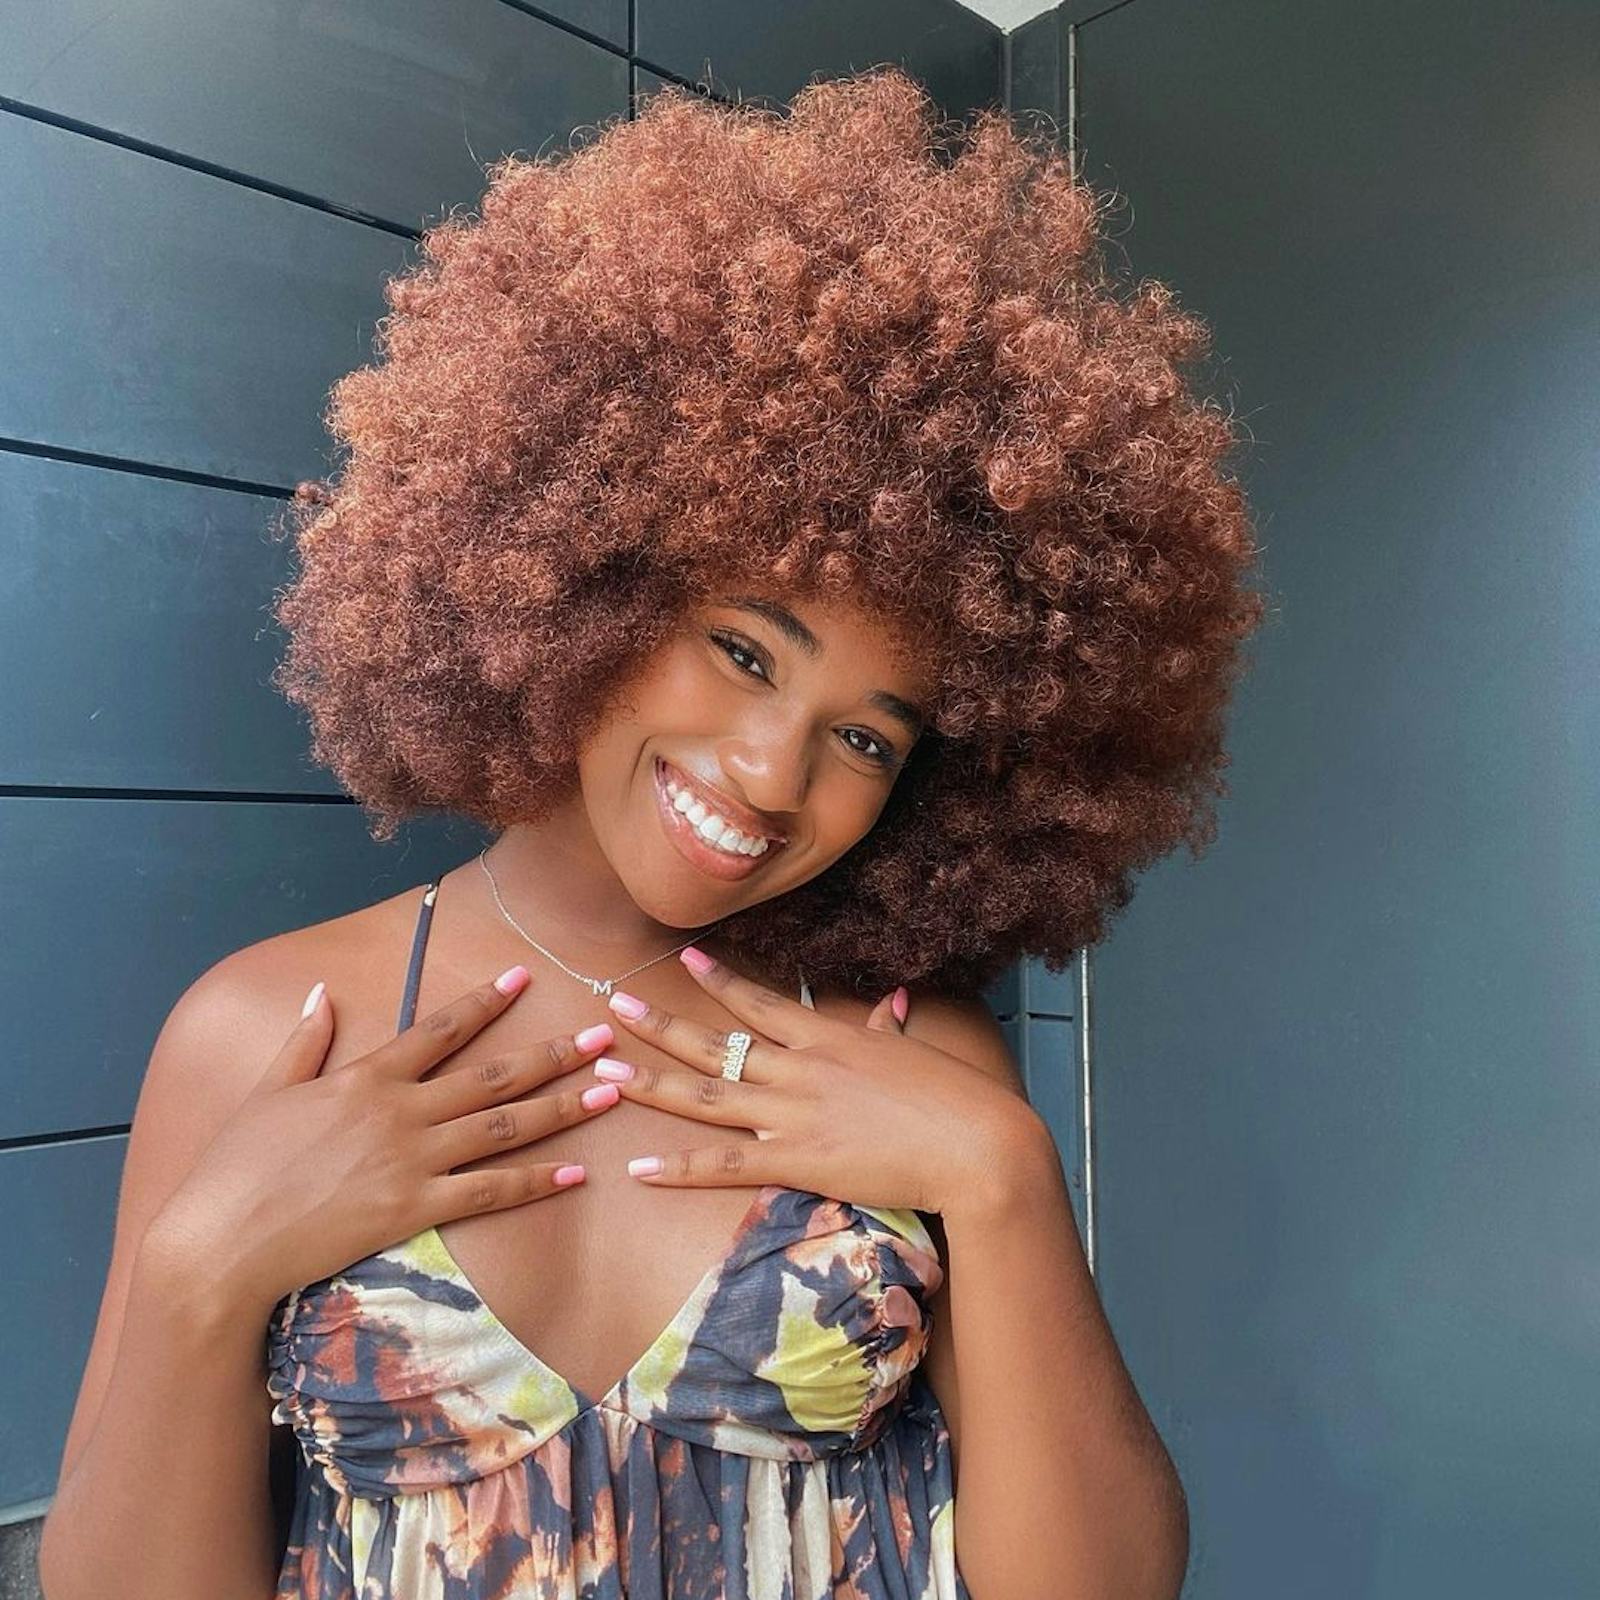 If You're Looking For Natural Hair Inspiration, These Are The Women To Follow On IG